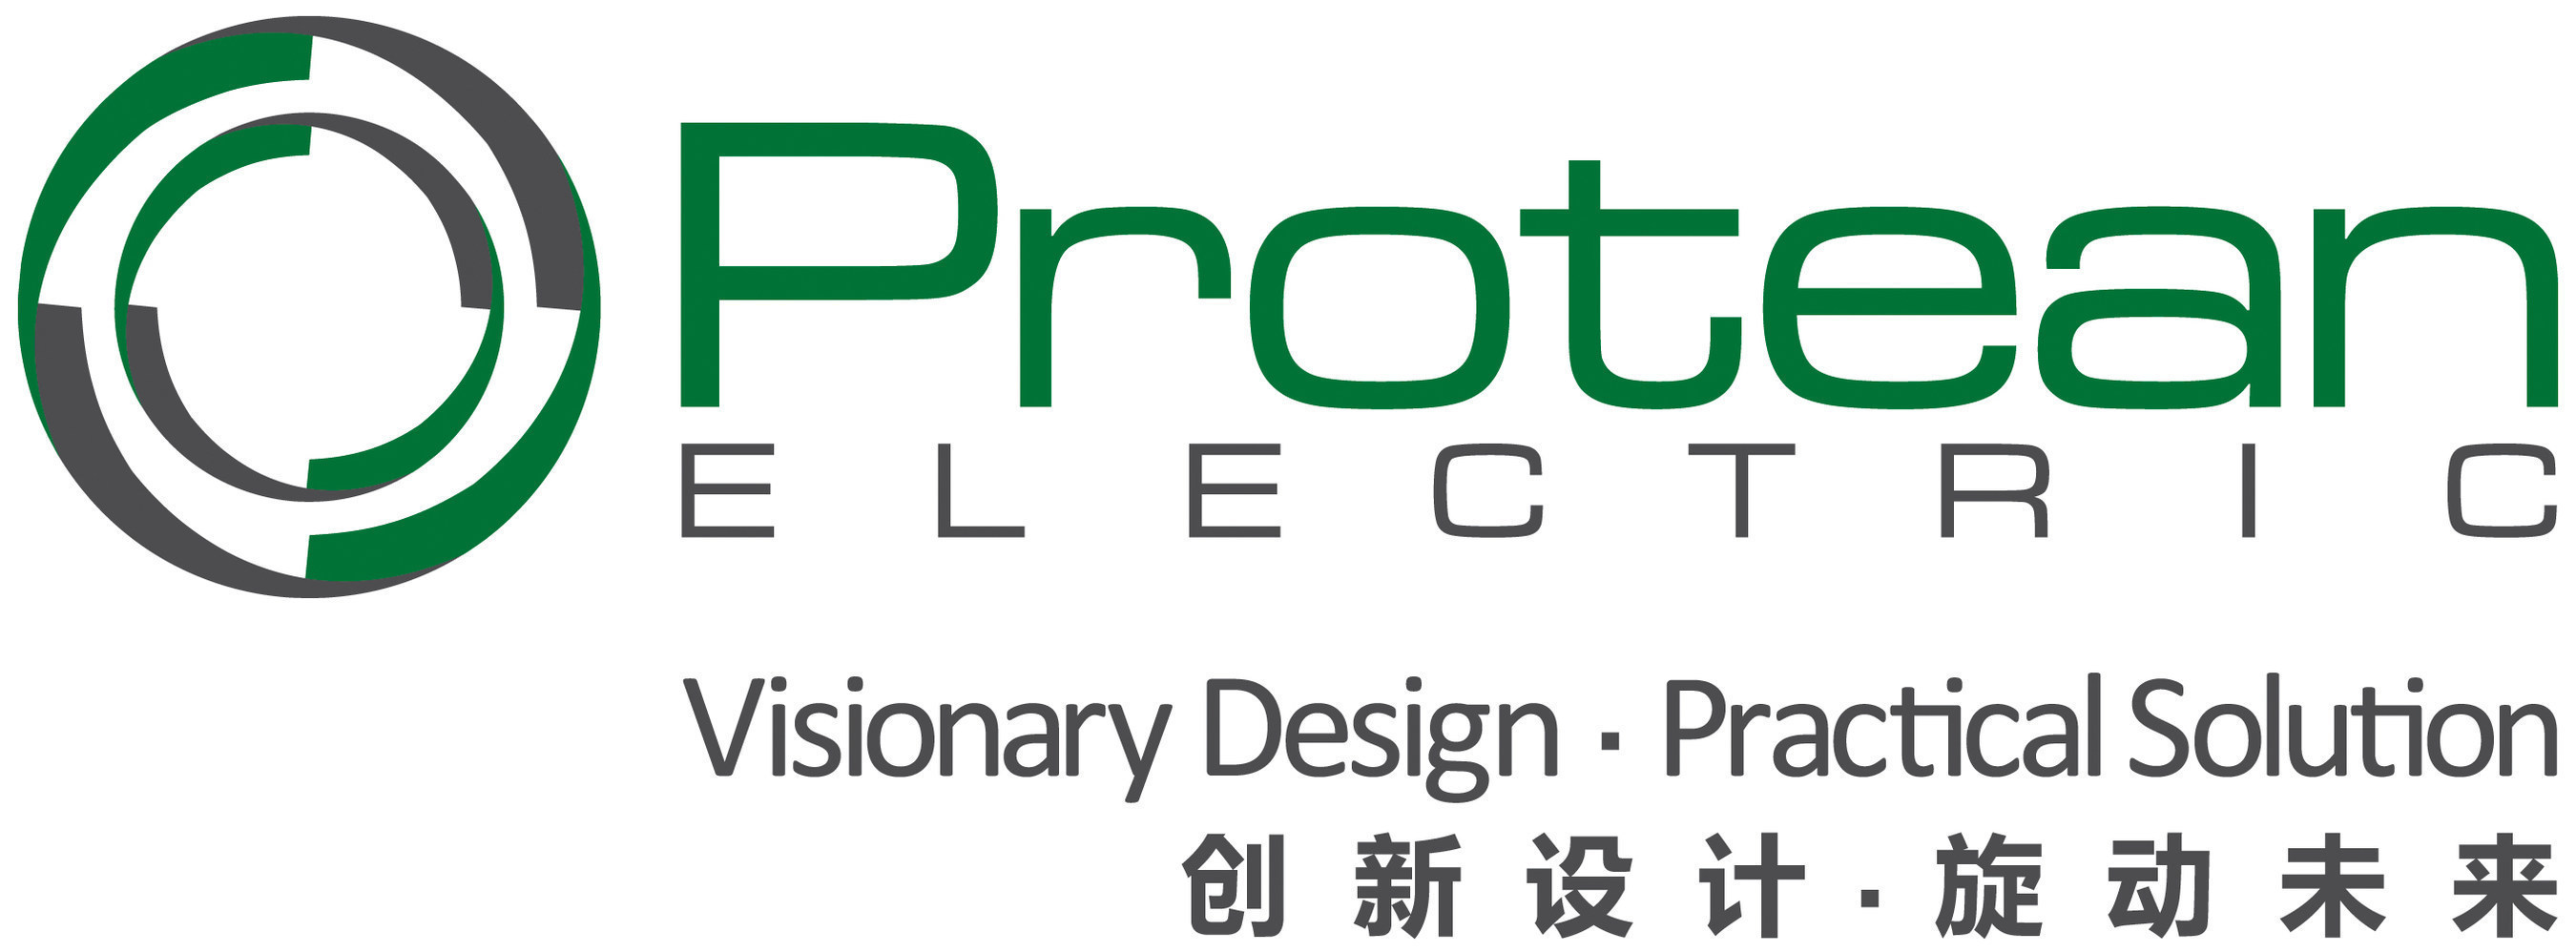 Protean Electric Logo with Tagline